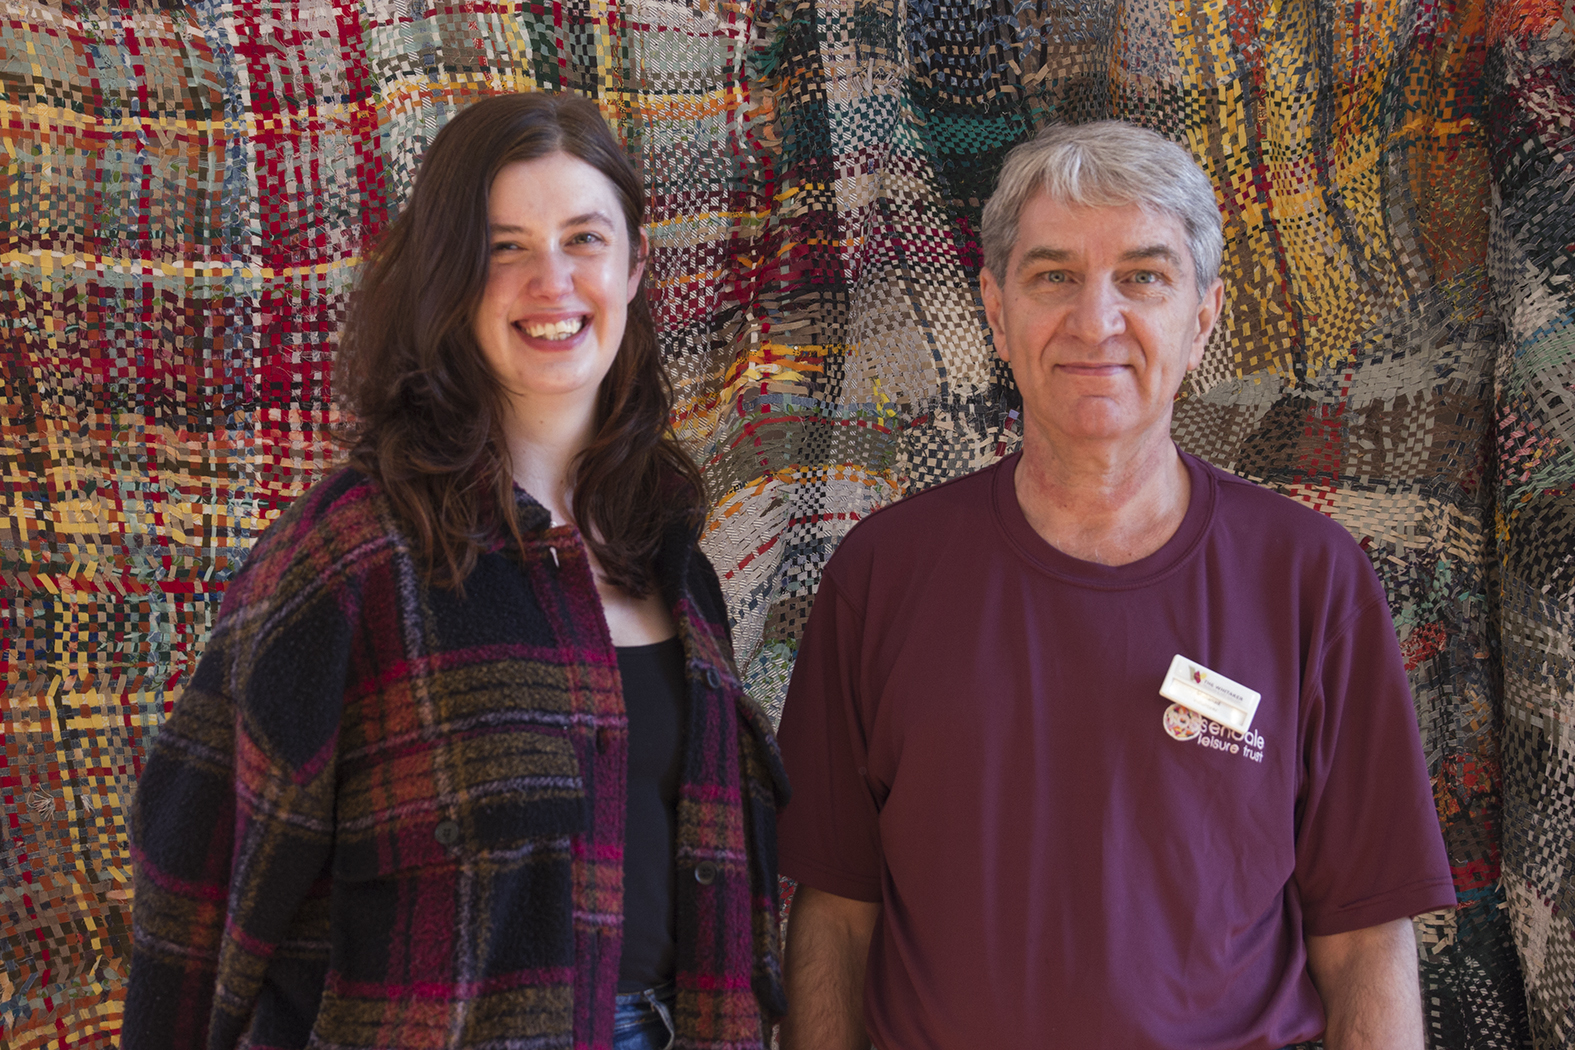 Volunteer co-ordinator Caroline Beardmore with Asylum seeker Muhanad Karzoun and in one of the galleries at The Whitaker Museum and Art Gallery, Rawtenstall.